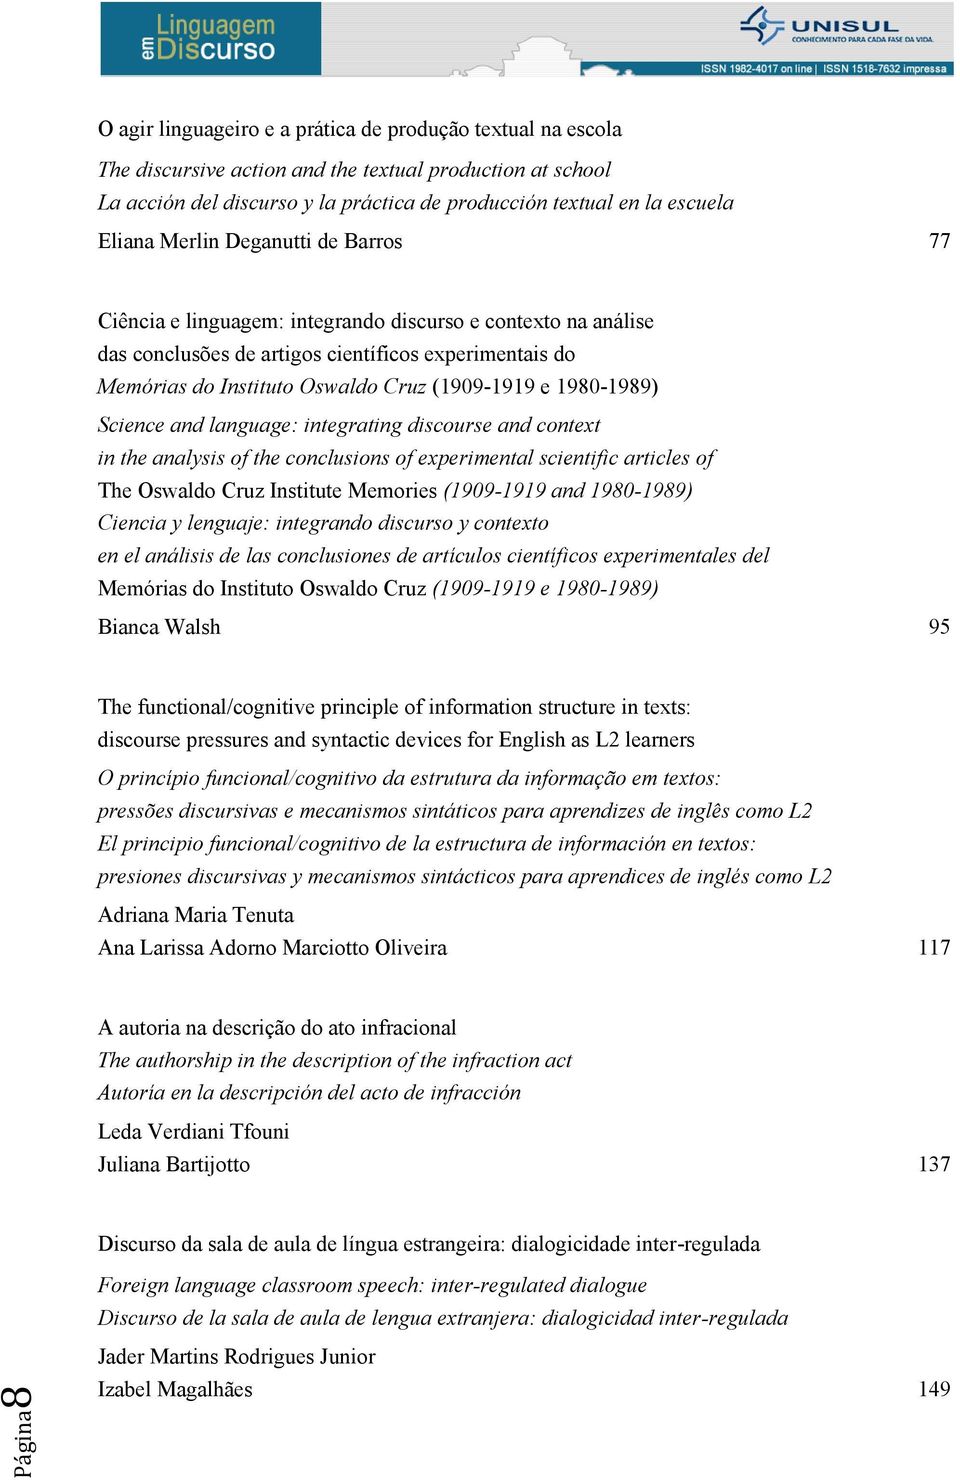 (1909-1919 e 1980-1989) Science and language: integrating discourse and context in the analysis of the conclusions of experimental scientific articles of The Oswaldo Cruz Institute Memories